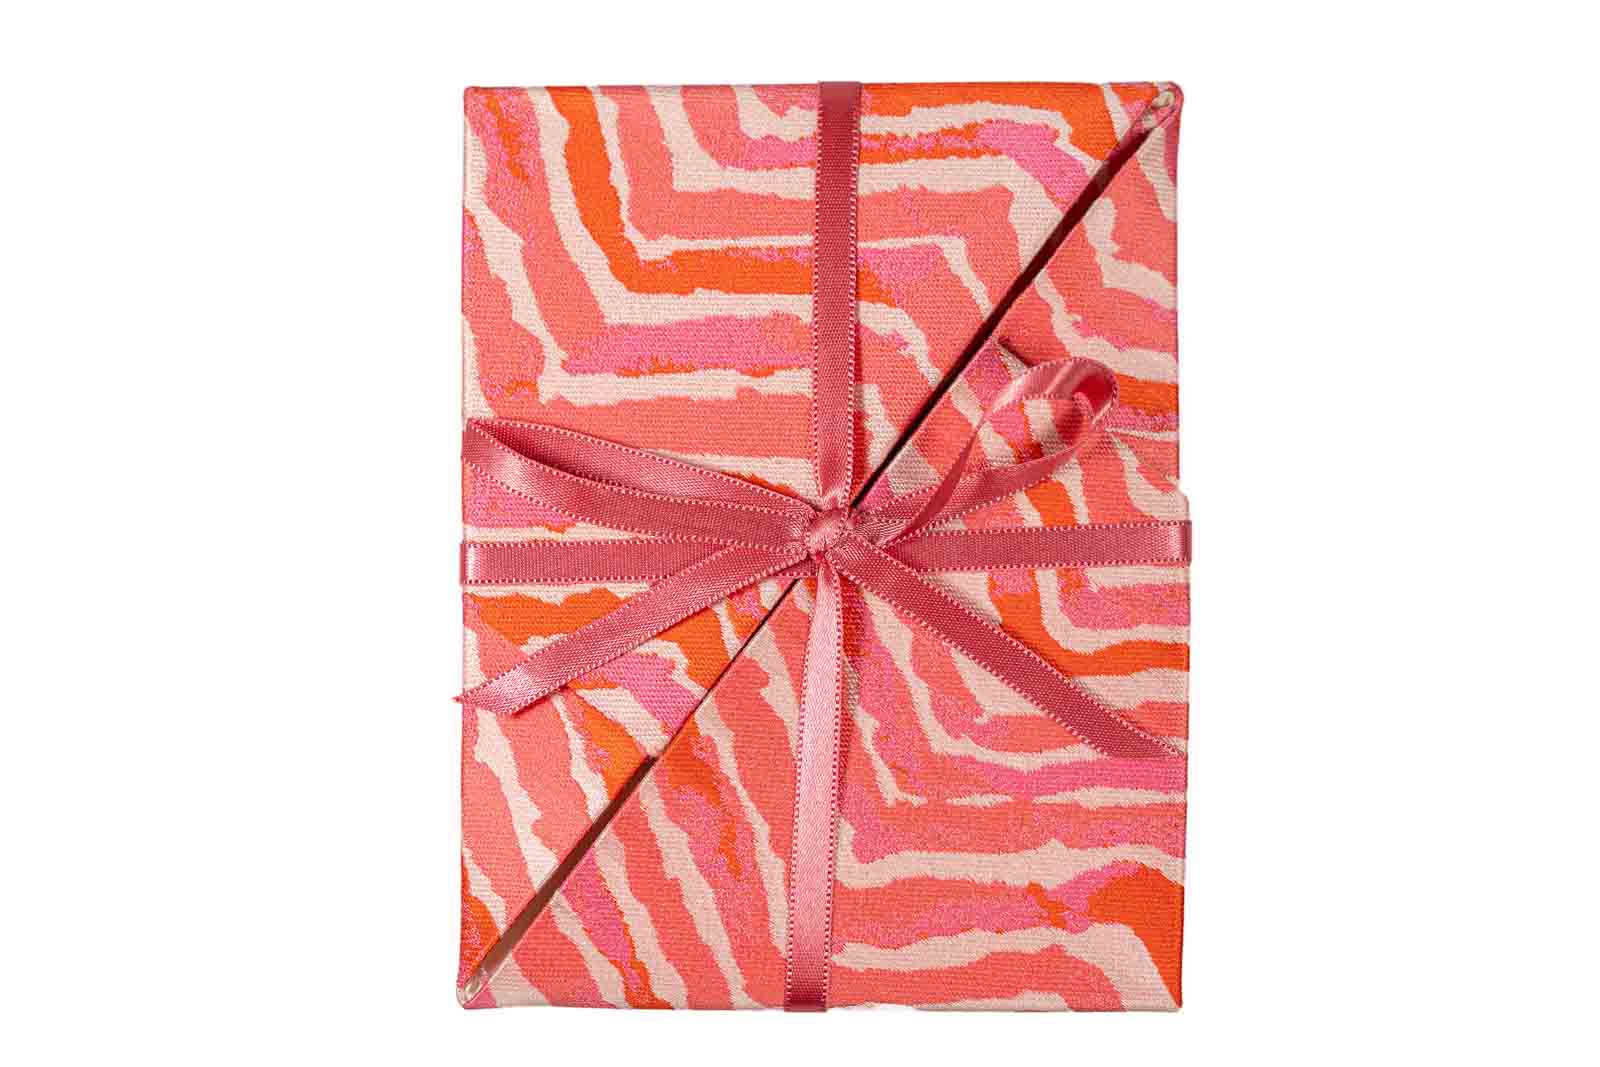 Sustainable Christmas Cards Pink Abstract Chevron Print